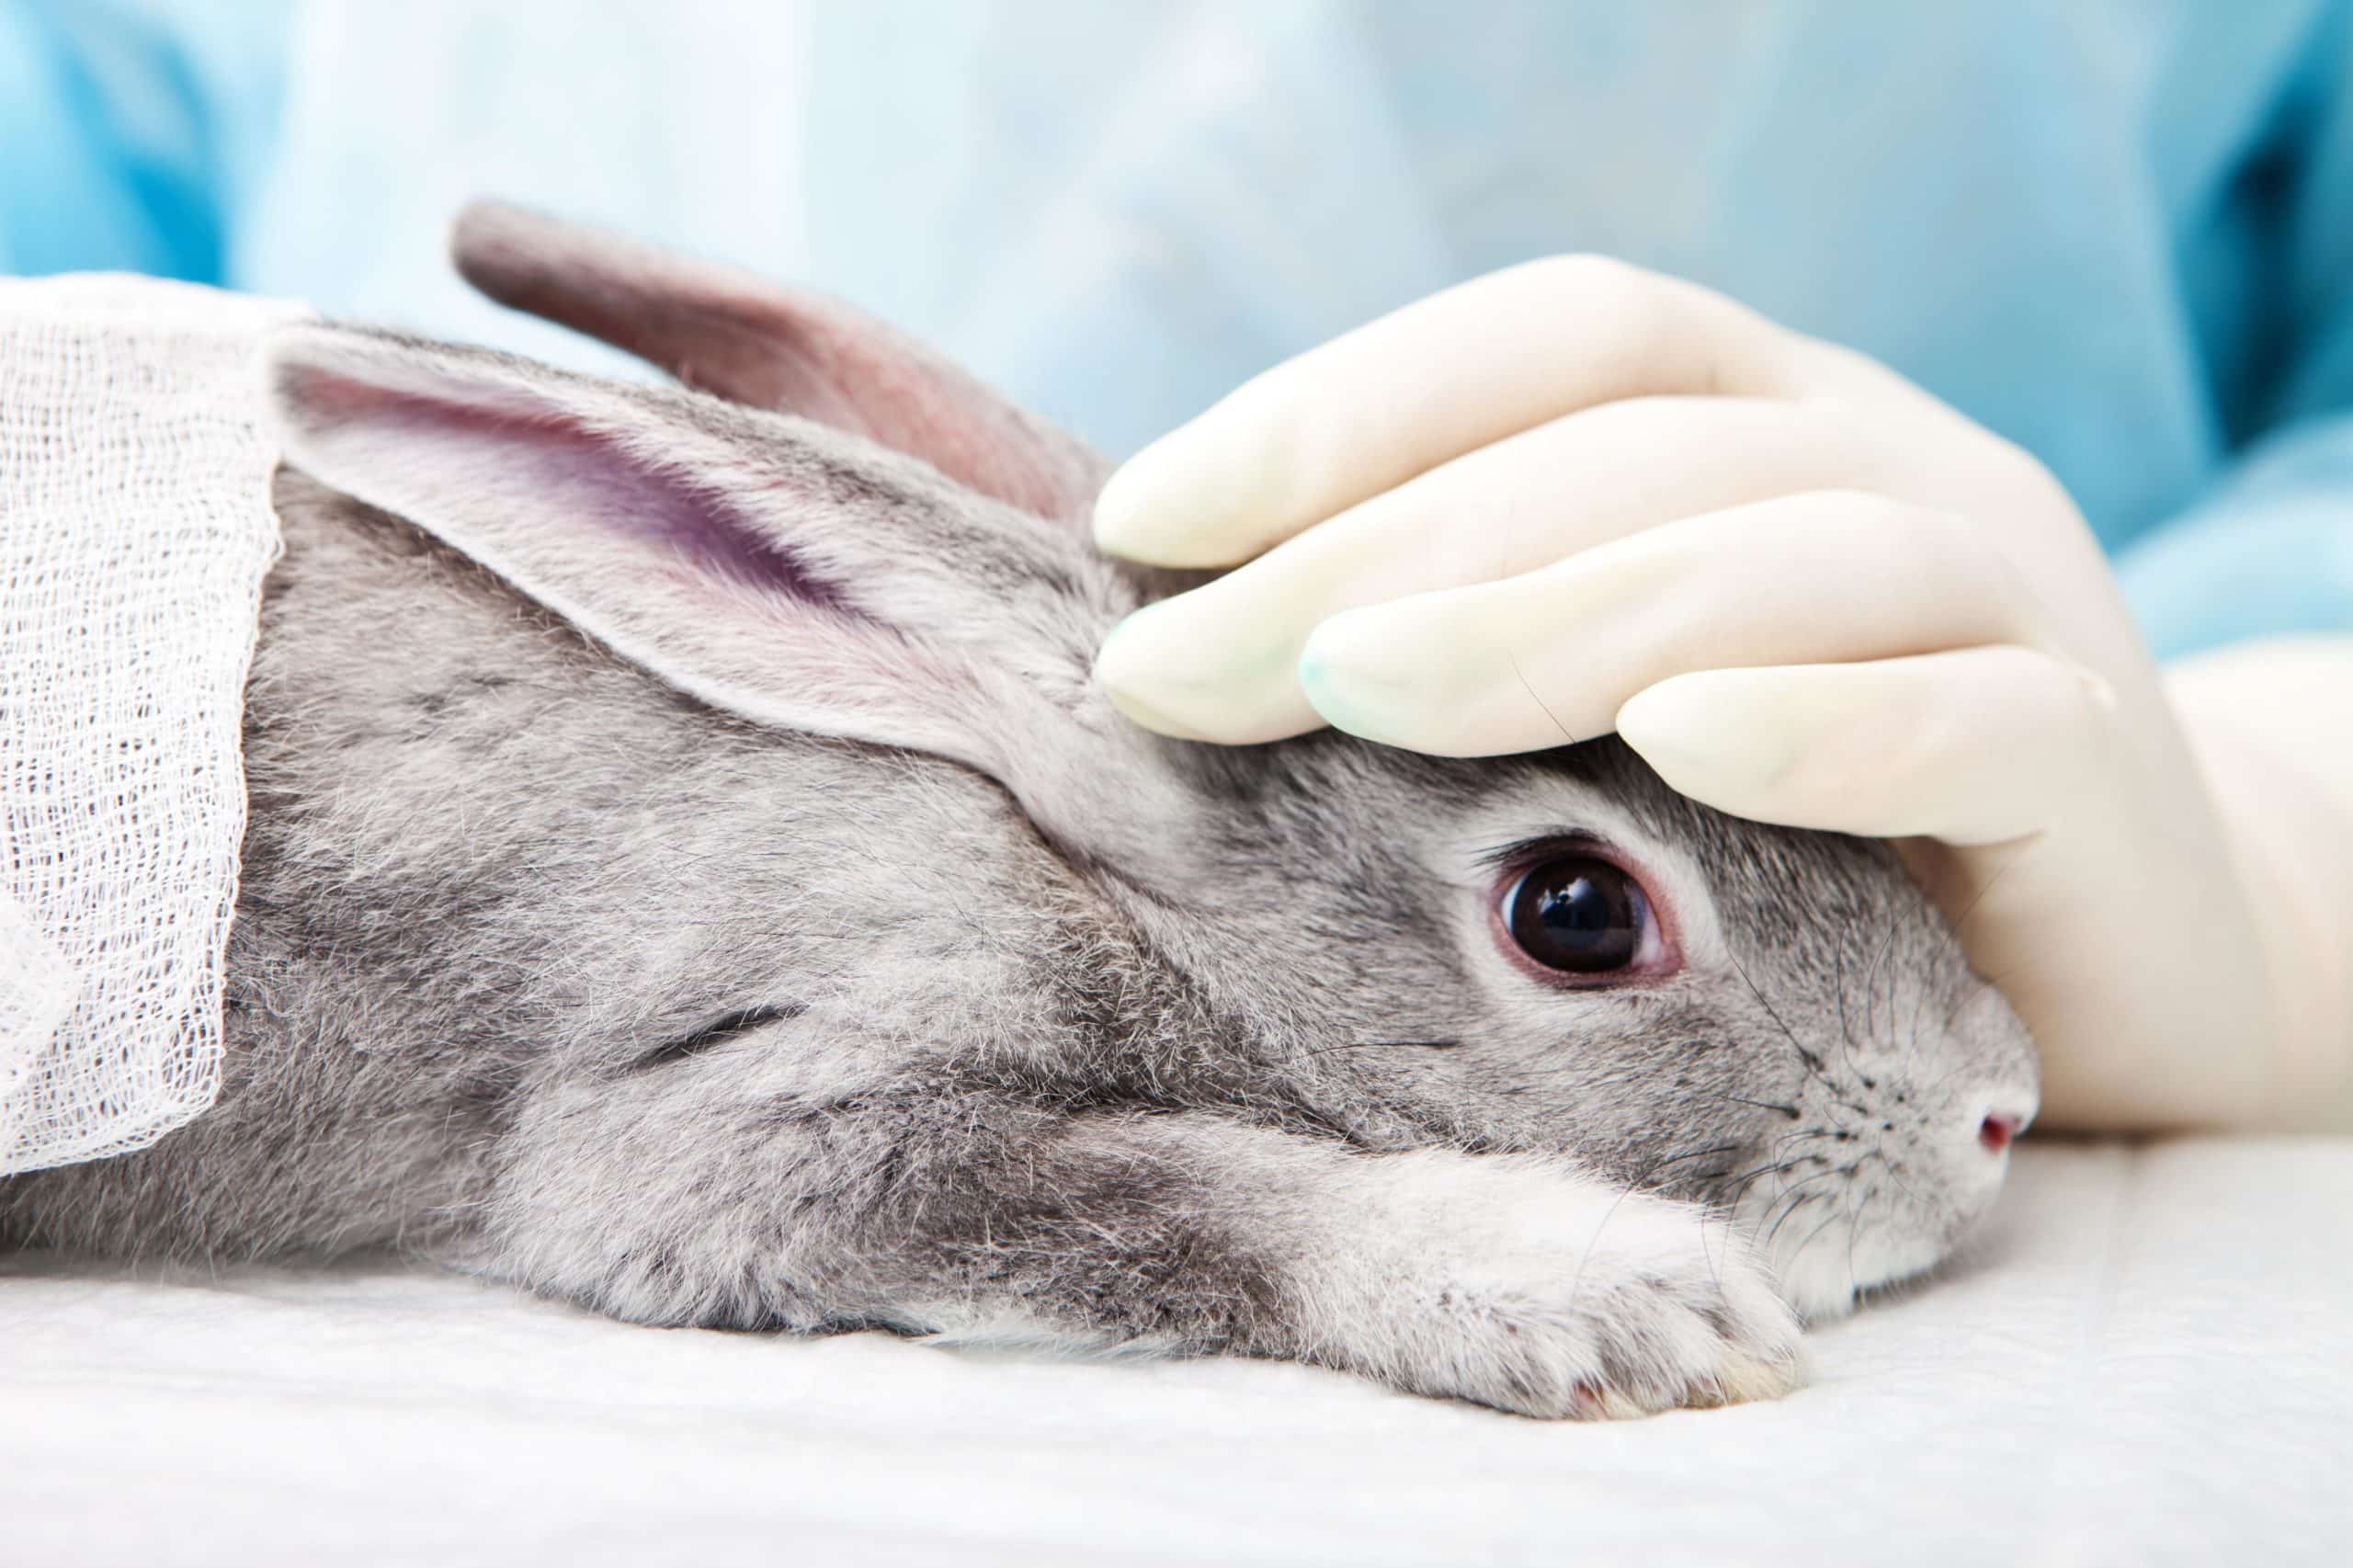 Sign the pledge to Be Cruelty Free! - Humane Society International (HSI)